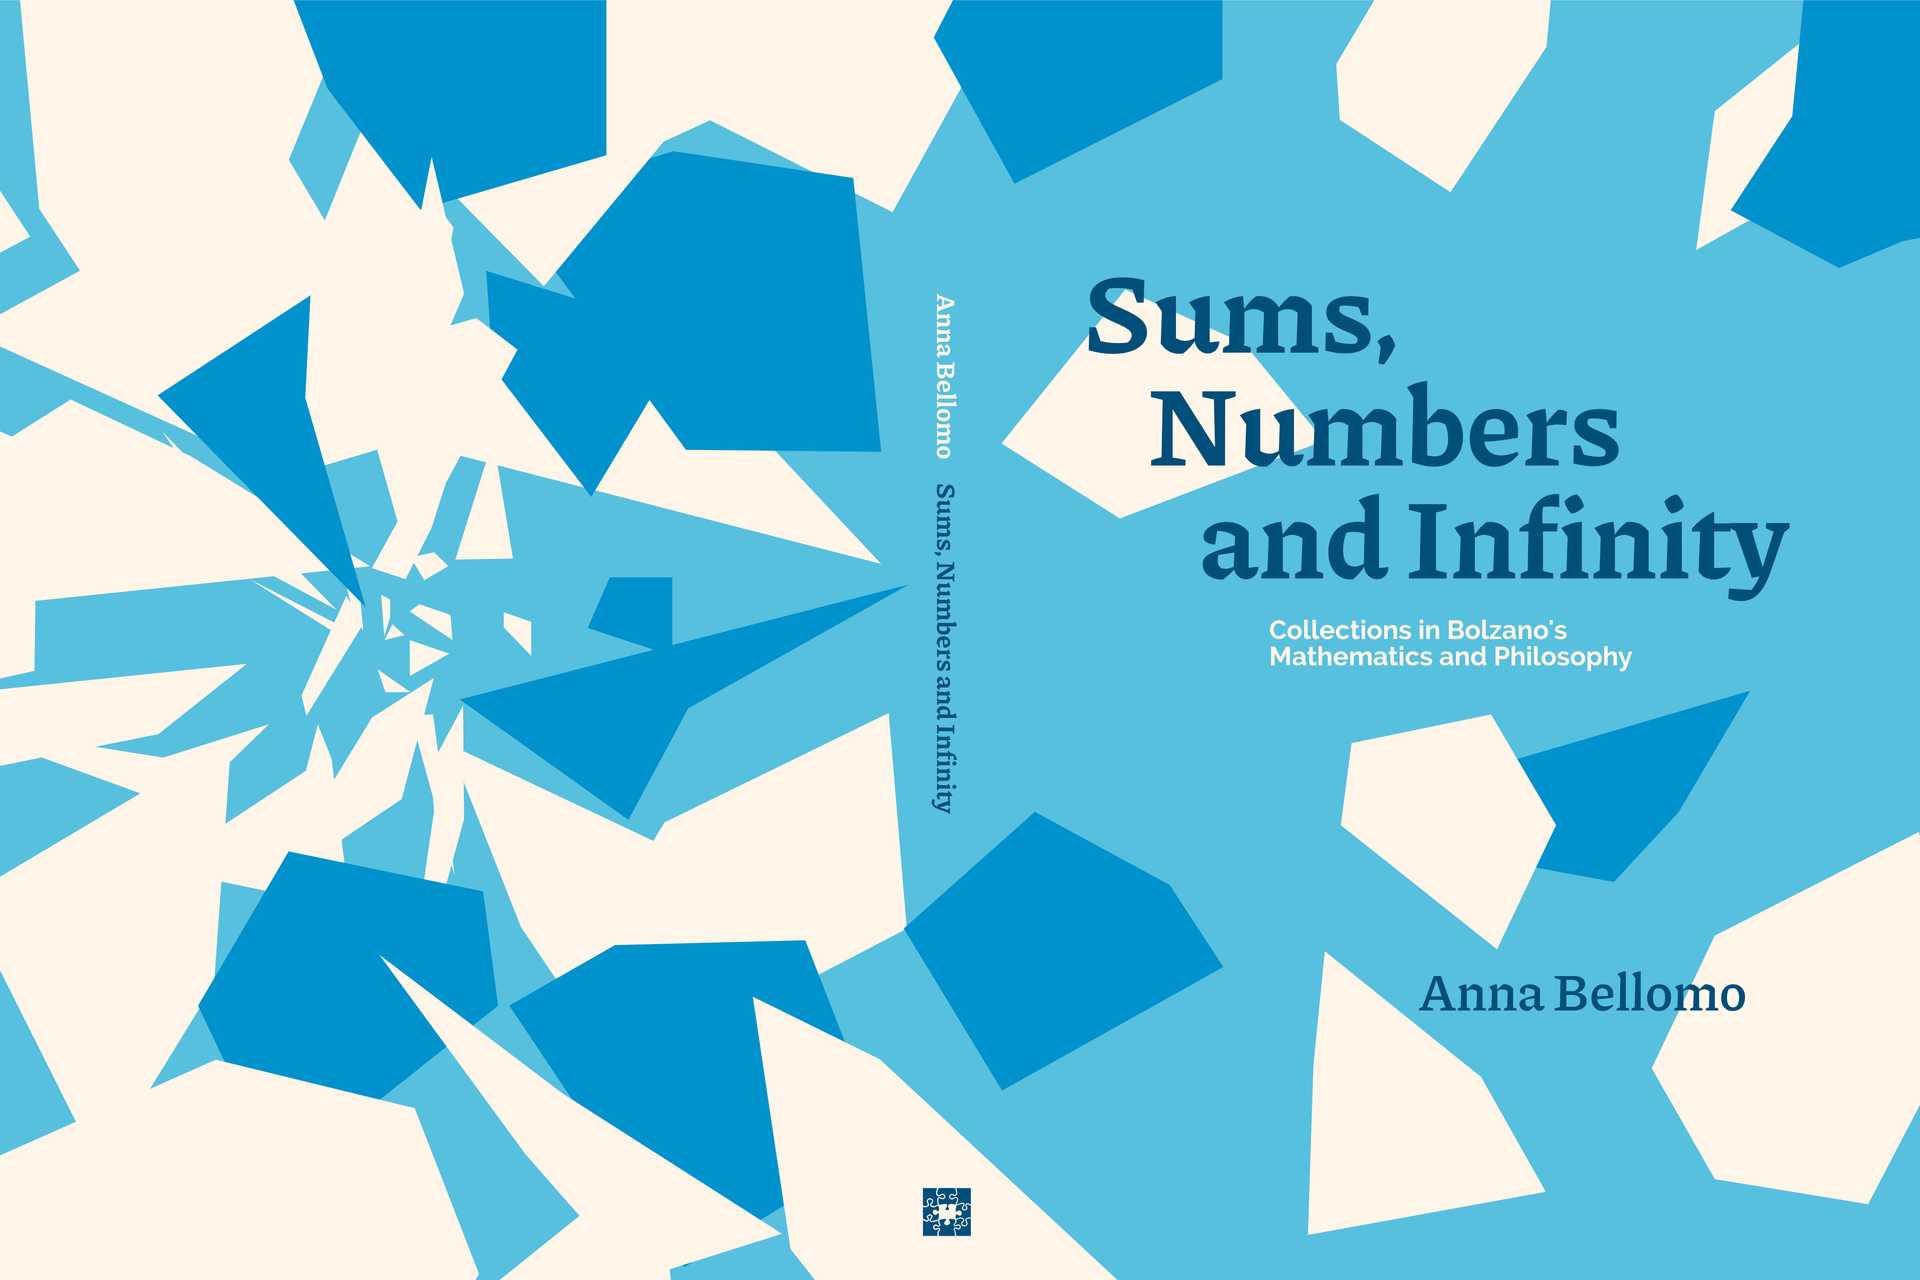 Image 5 of project 'Sums, Numbers and Infinity'